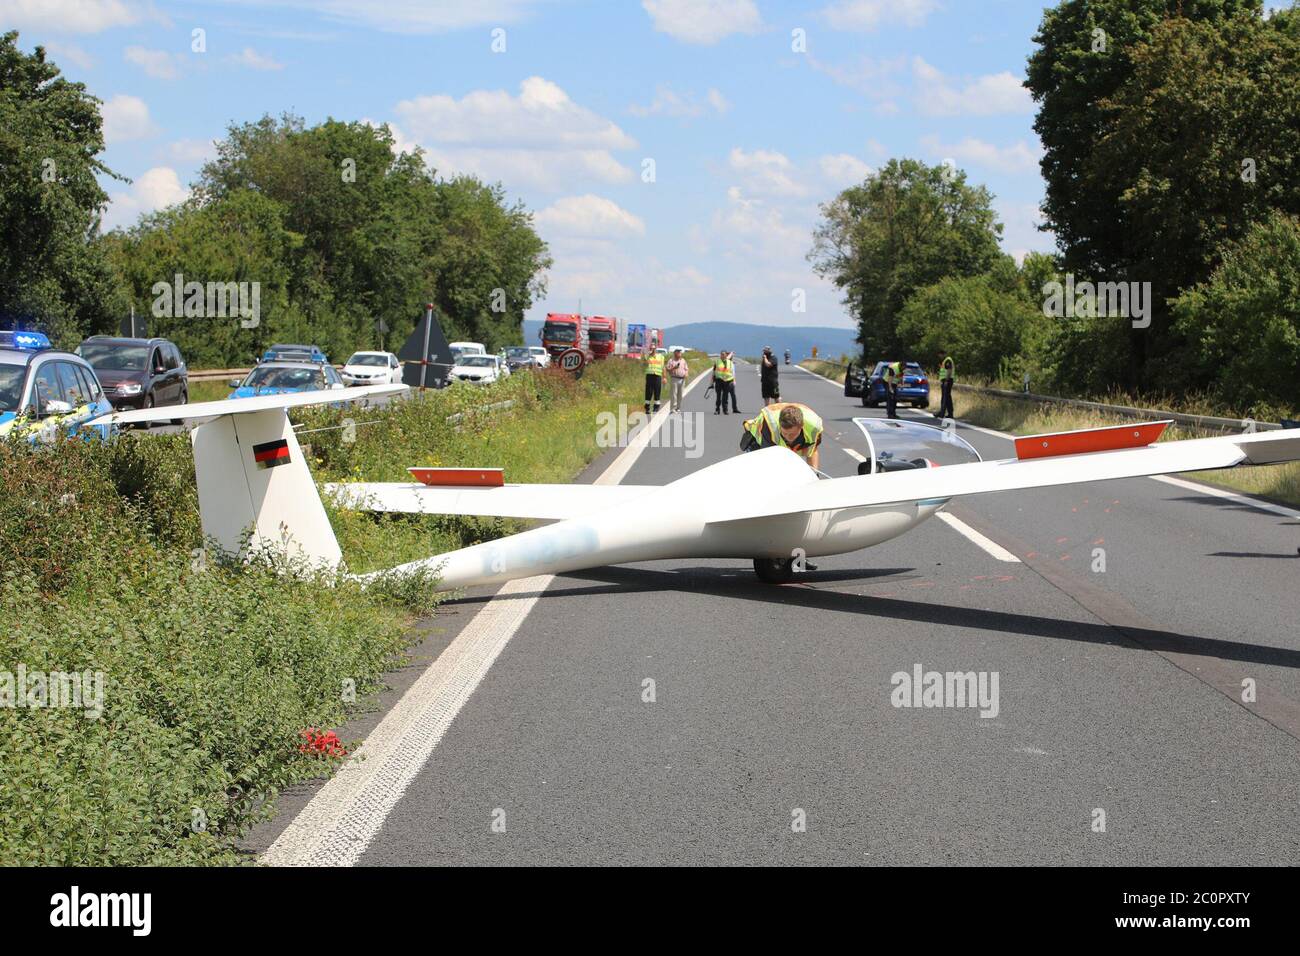 Miltenberg, Germany. 12th June, 2020. A glider is parked on the Bundesstraße 469. 67-year-old pilot was seriously injured in the emergency landing. He had taken off with his plane from an airfield in Aschaffenburg and had been towed up to the height by a motorized aircraft. Technical problems had occurred with the motorised aircraft, so that the glider had to be released earlier than intended and had not reached the necessary flying altitude. The pilot had therefore decided to make an emergency landing. Credit: Ralf Hettler/dpa/Alamy Live News Stock Photo